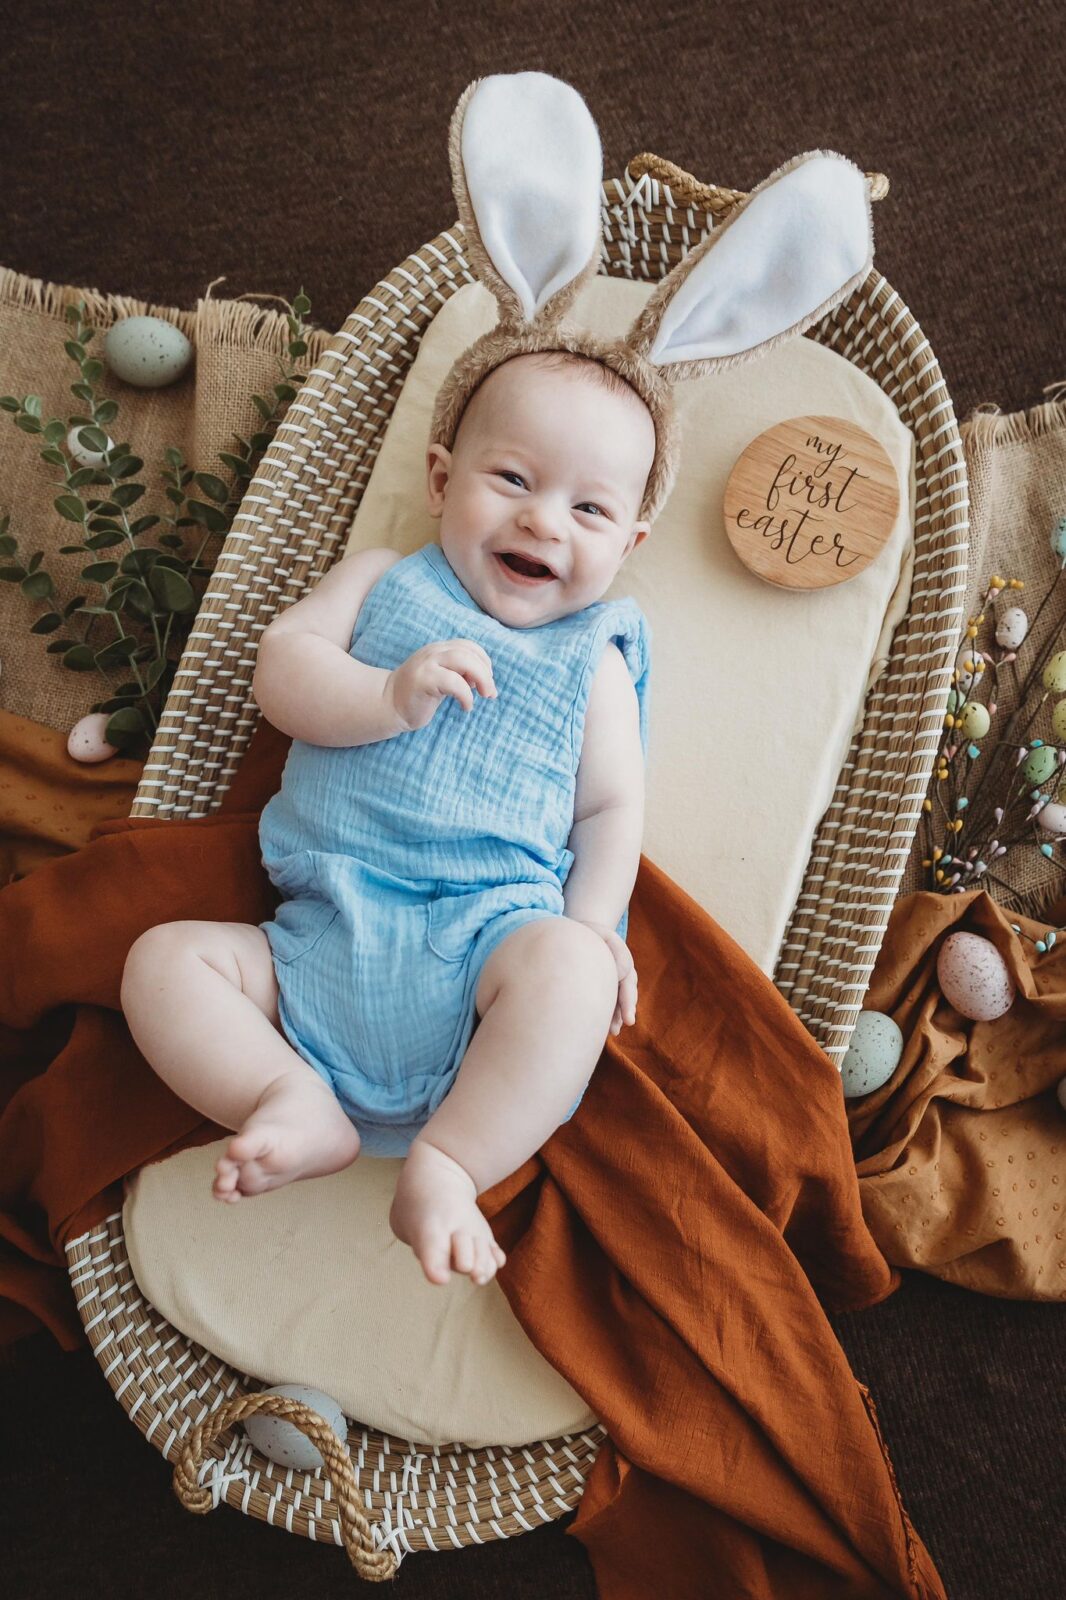 Even the small movement that comes from a cute little laugh can end up a blurry photo if your shutter speed is too slow. Be ready so you don't miss moments like this one!